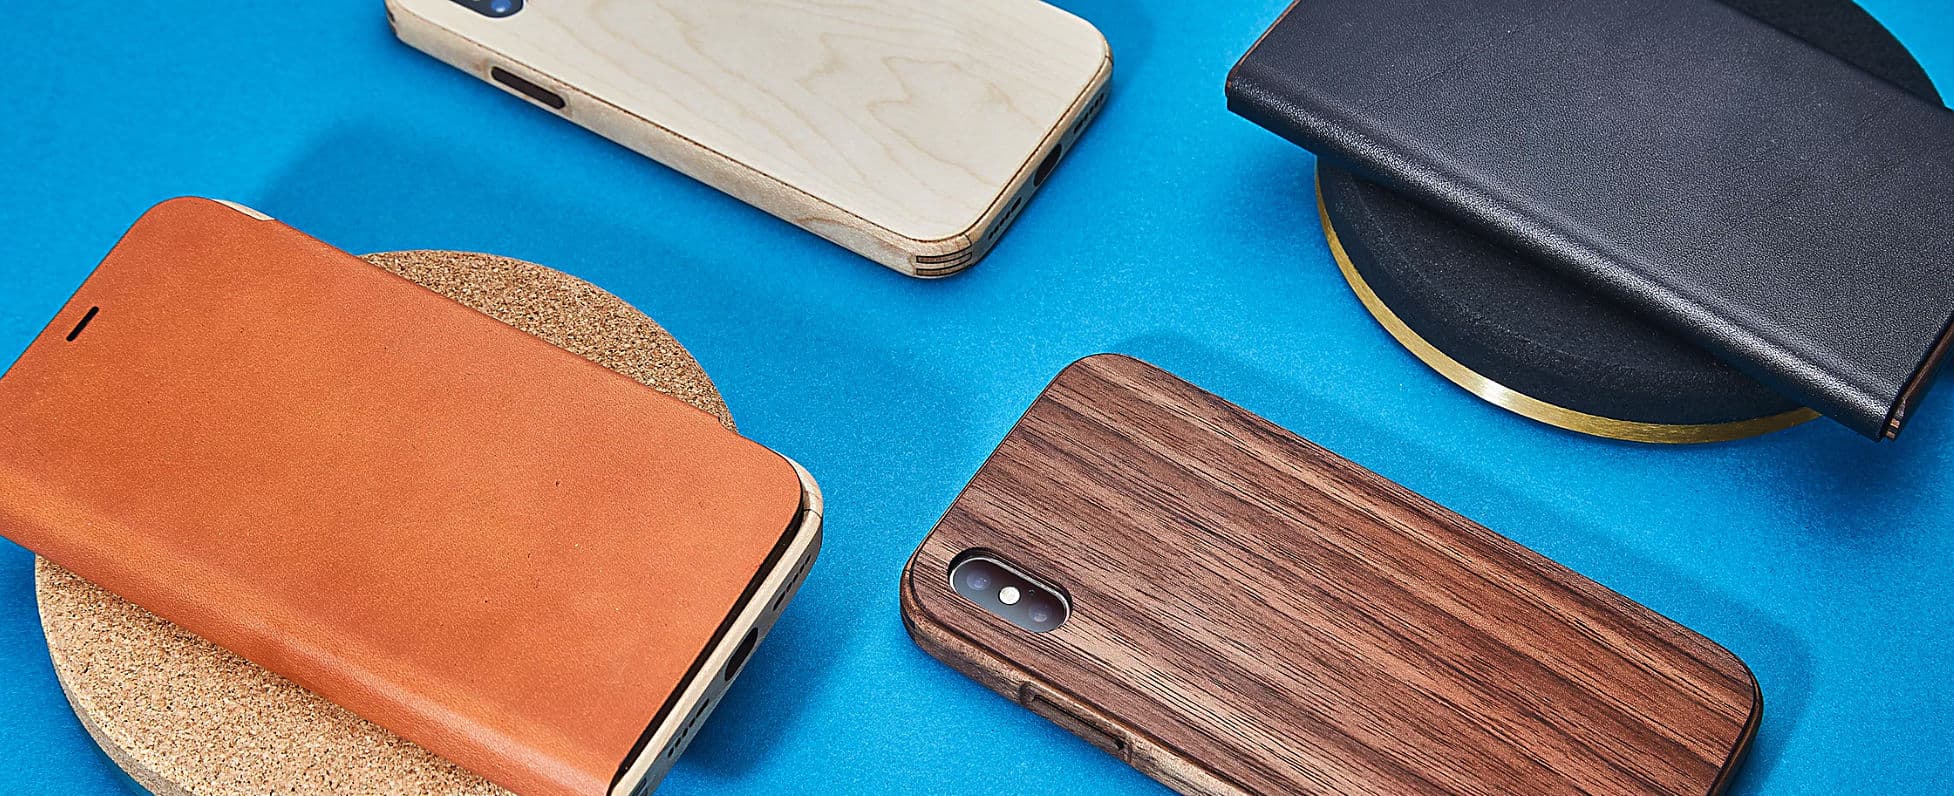 Grovemade iPhone XS cases